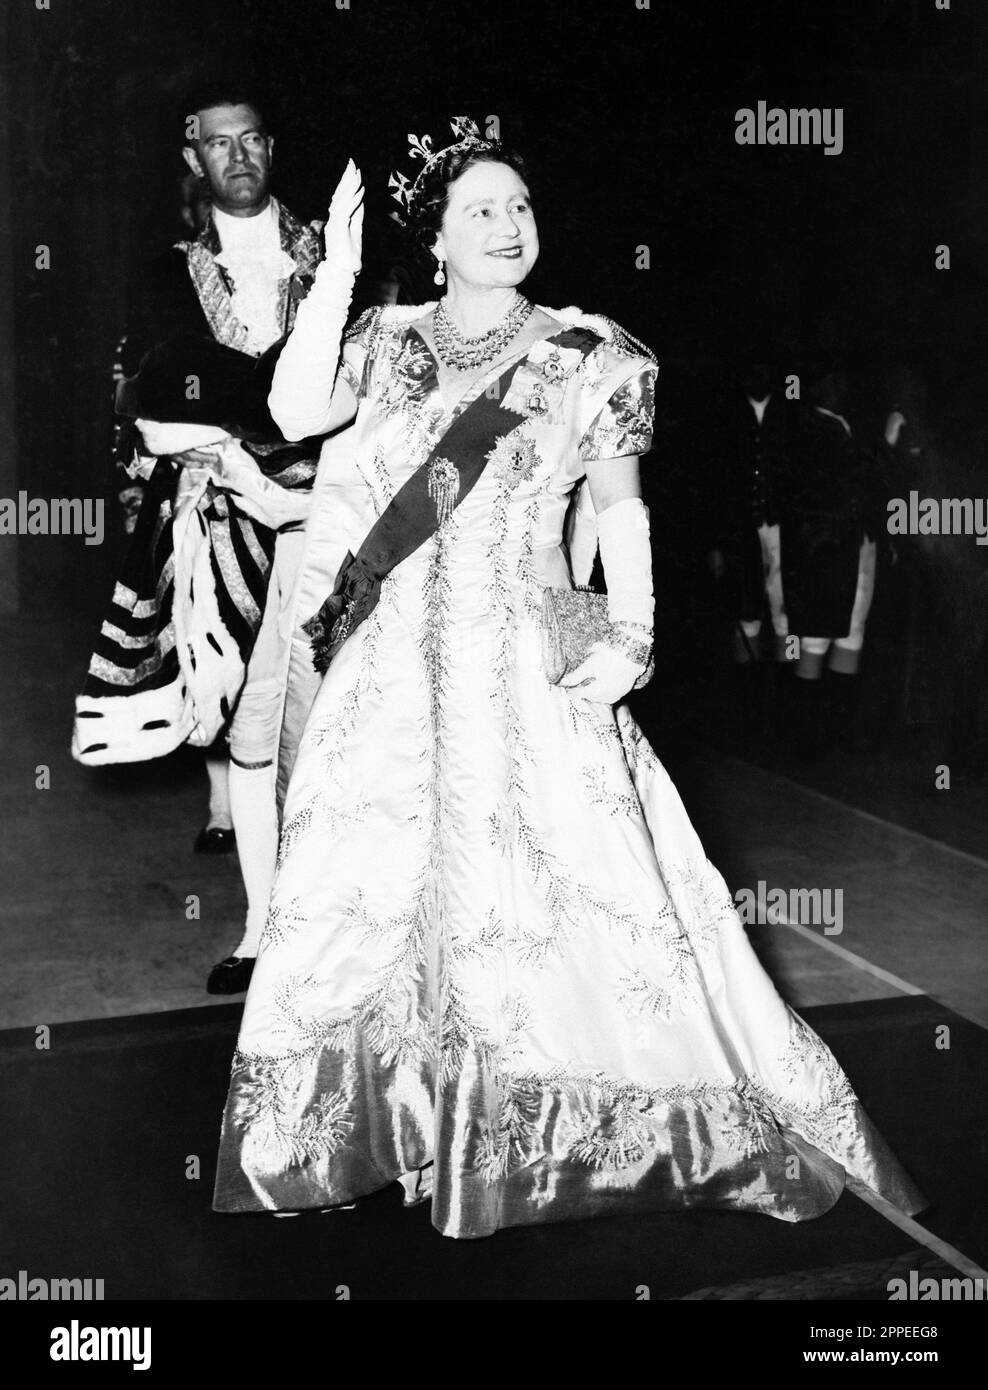 File photo dated 02/06/53 of the Queen Mother waves after the coronation of her daughter Queen Elizabeth II at Westminster Abbey. King Charles III's coronation will take place on May 6, in a ceremony steeped in 1,000 years of history. The King will be crowned with the historic St Edward's Crown - the same one his mother, Queen Elizabeth II, was crowned with. Issue date: Monday April 24, 2023. Stock Photo